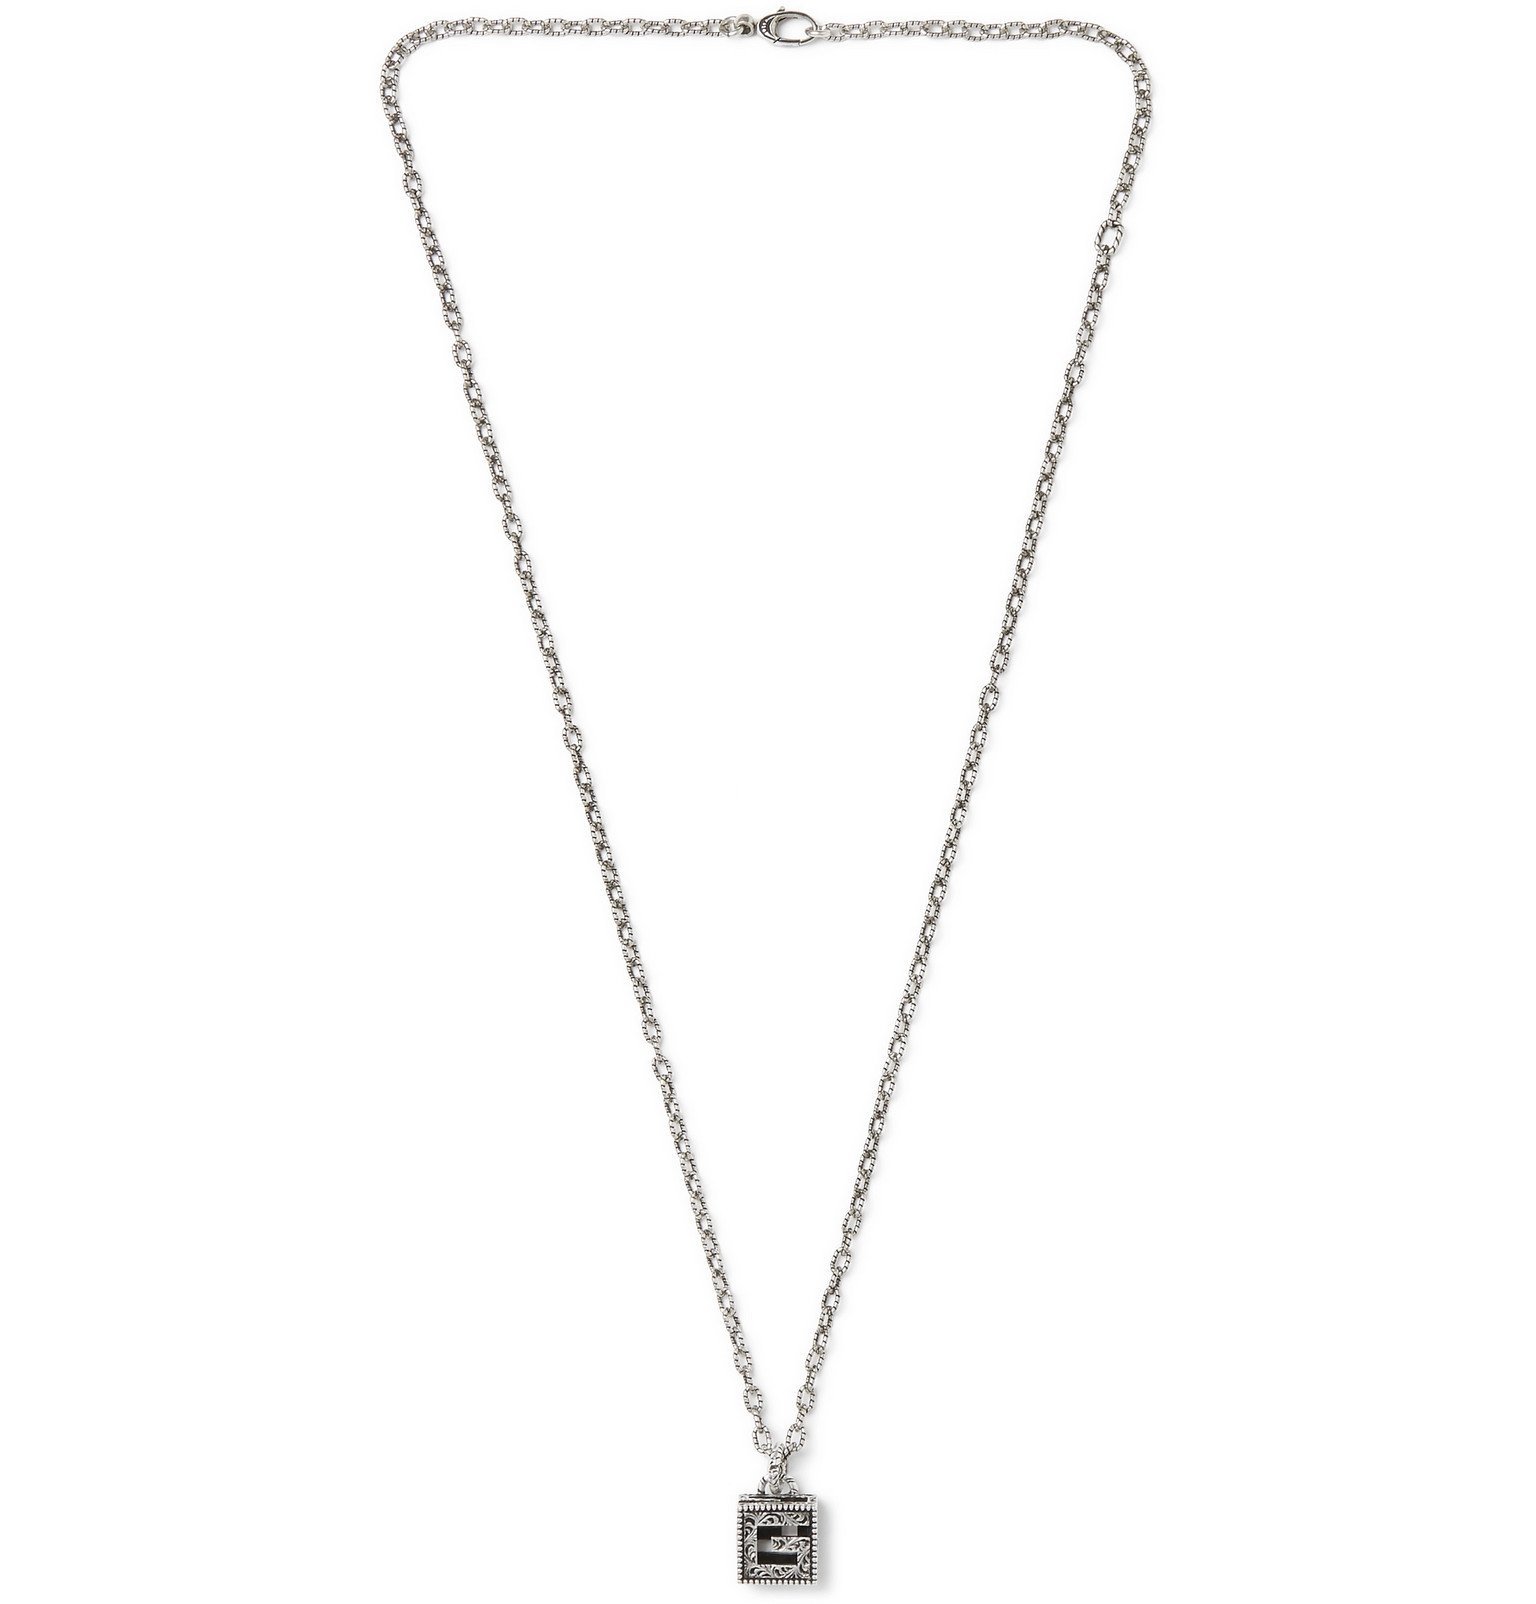 Gucci - Engraved Burnished Sterling Silver Necklace - Silver Gucci